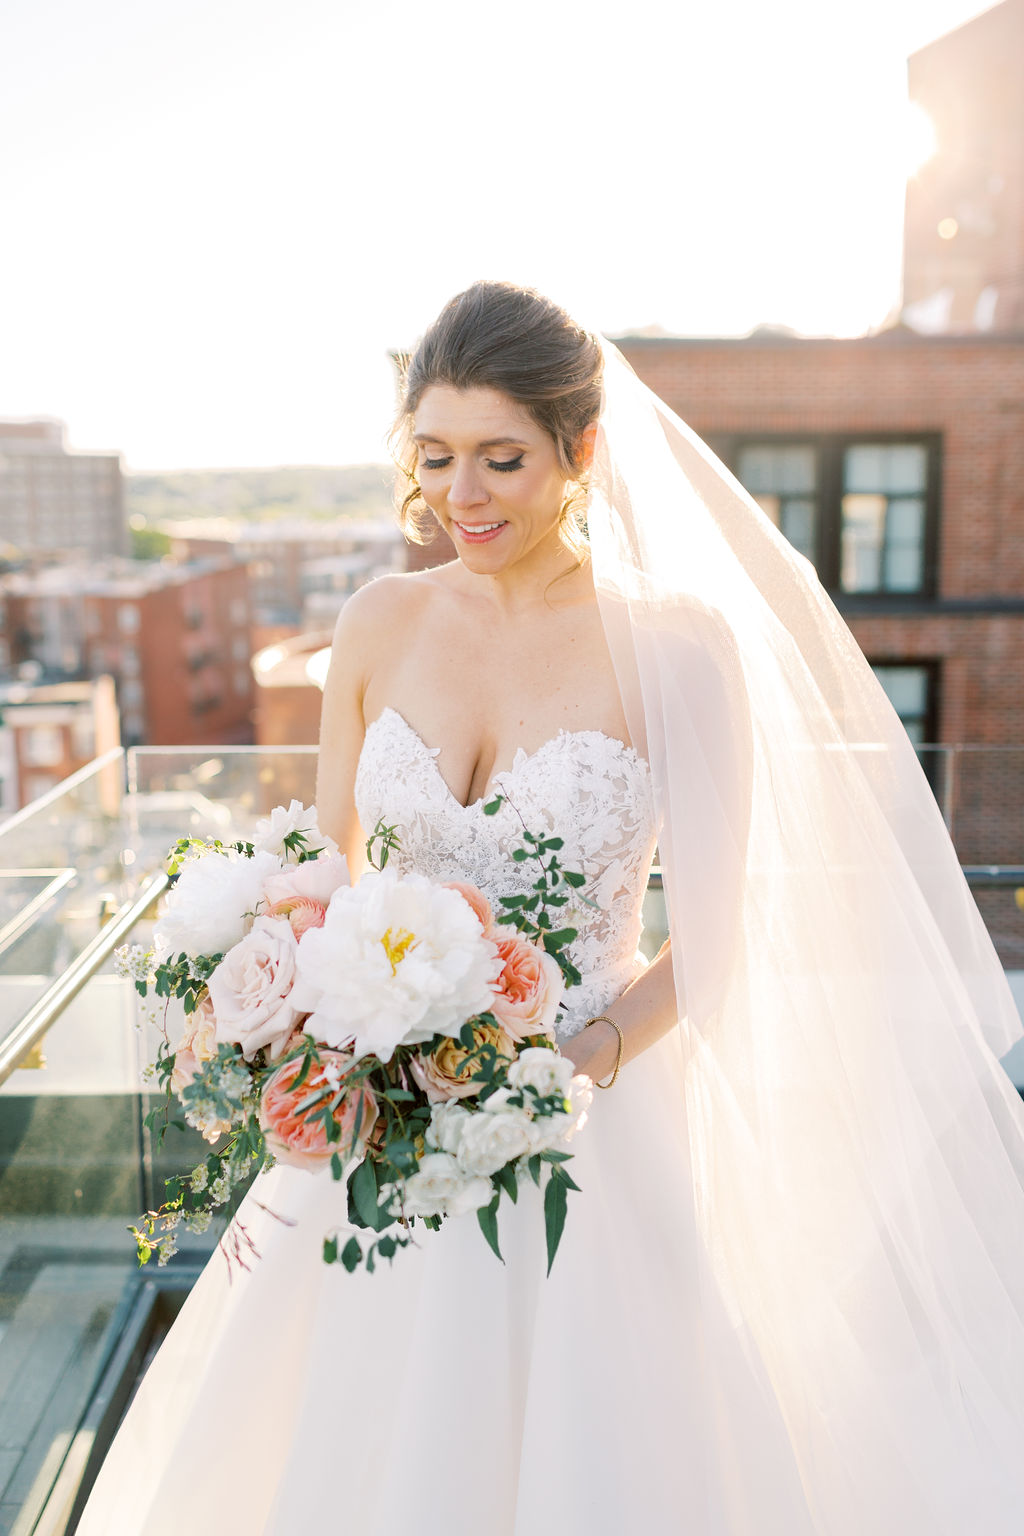 Rooftop Intimate Wedding at The Line Hotel - Sweet Root Village Blog